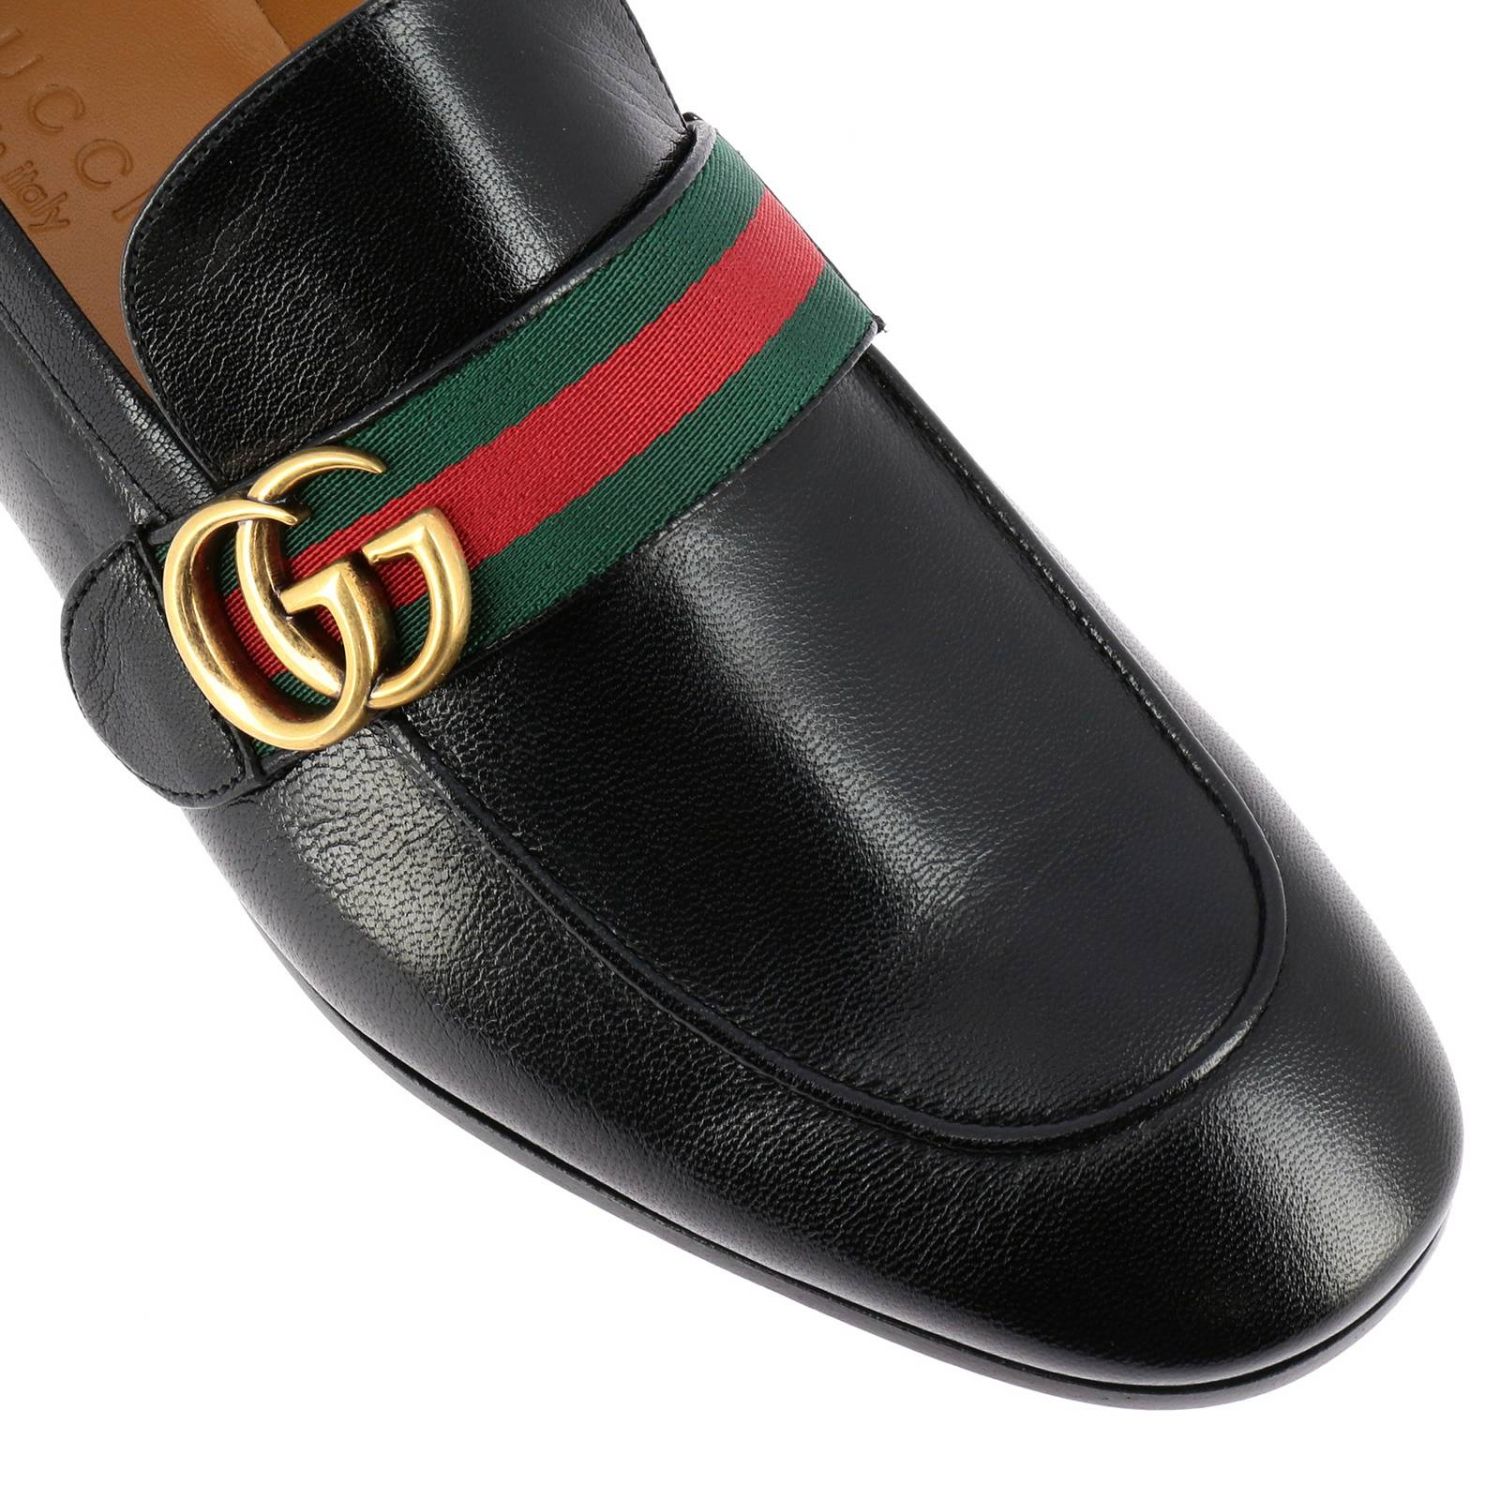 GUCCI: Shoes men | Loafers Gucci Men Black | Loafers Gucci 428609 D3VN0 ...